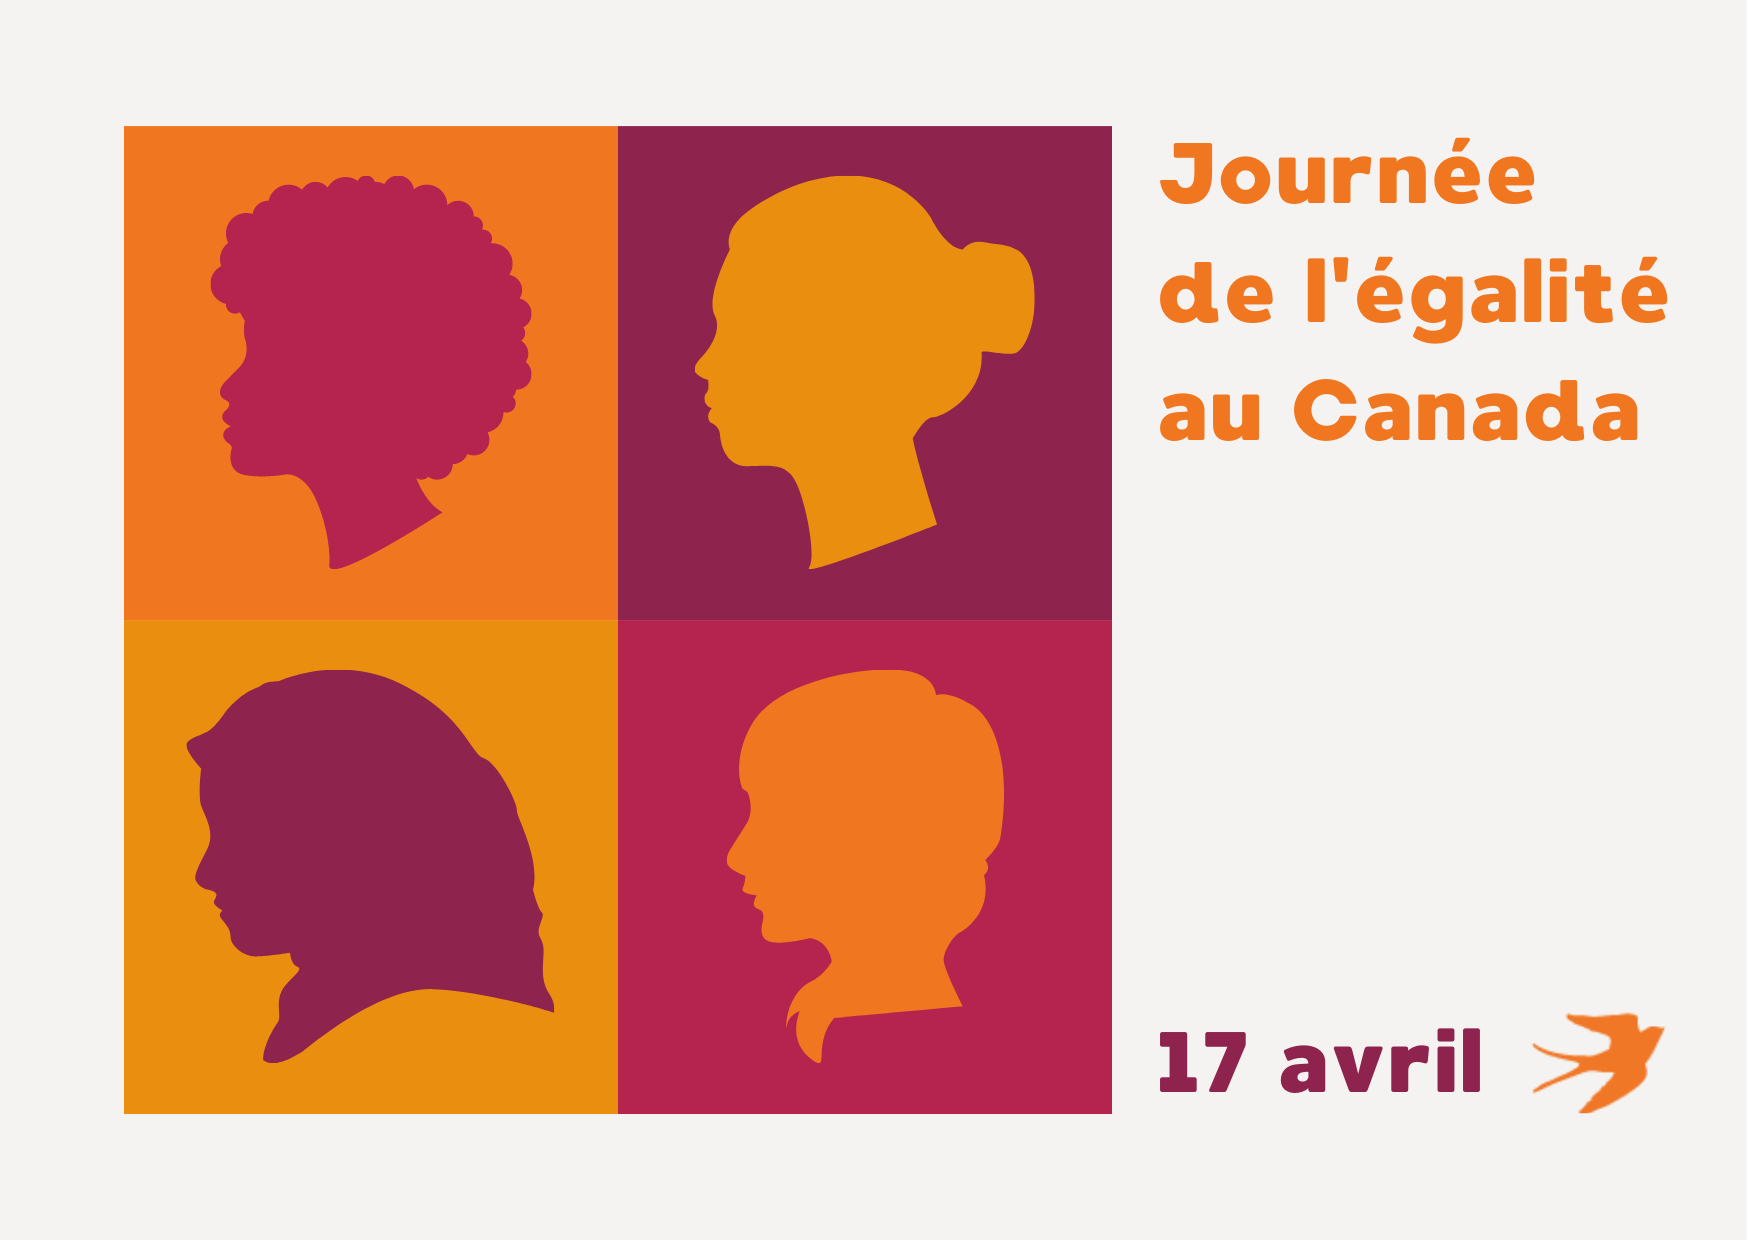 April 17 Equality Day in Canada